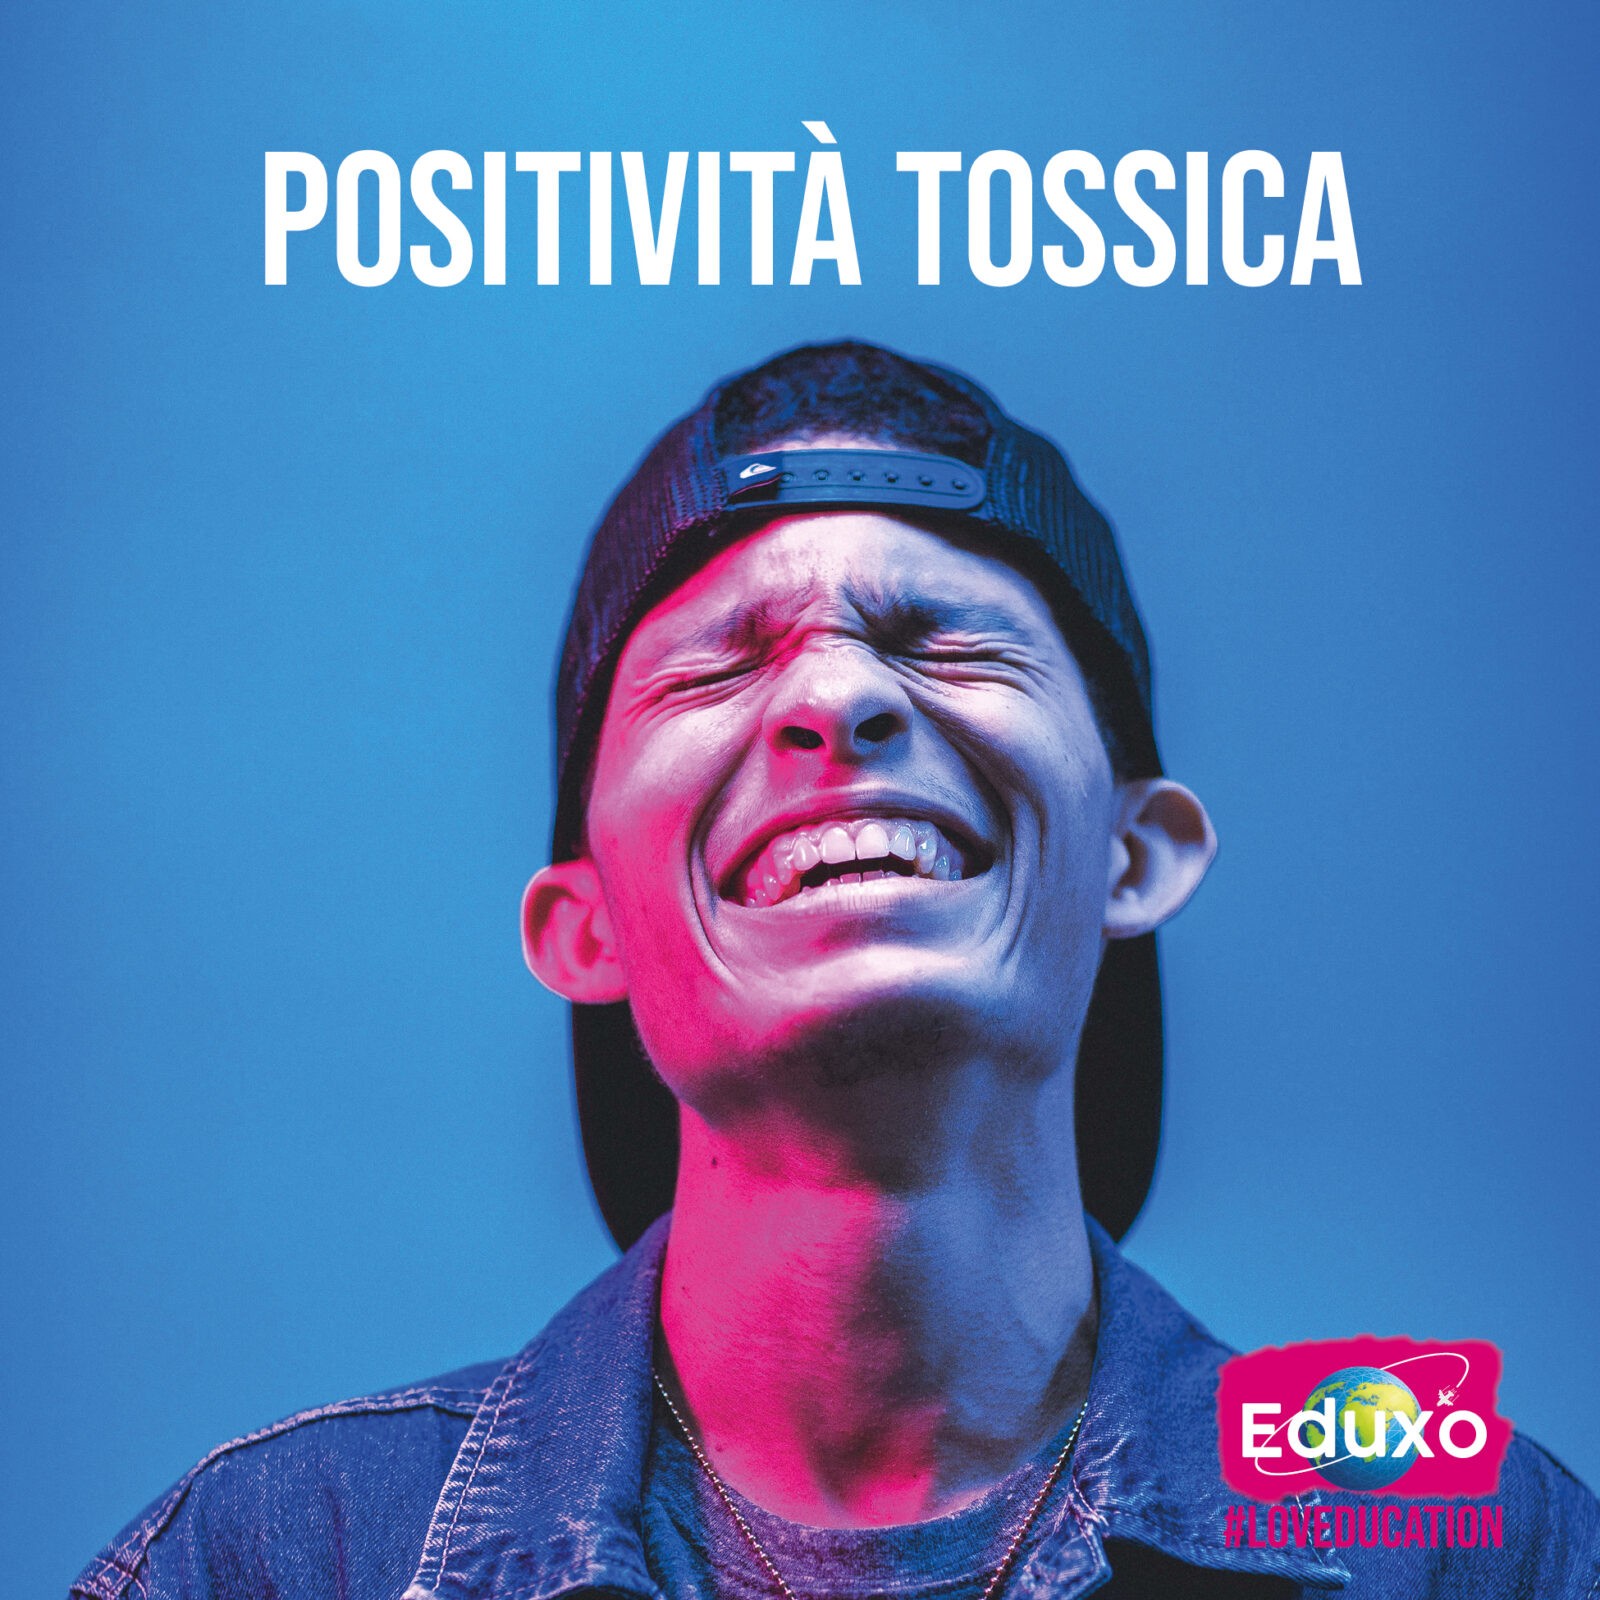 You are currently viewing Positività tossica